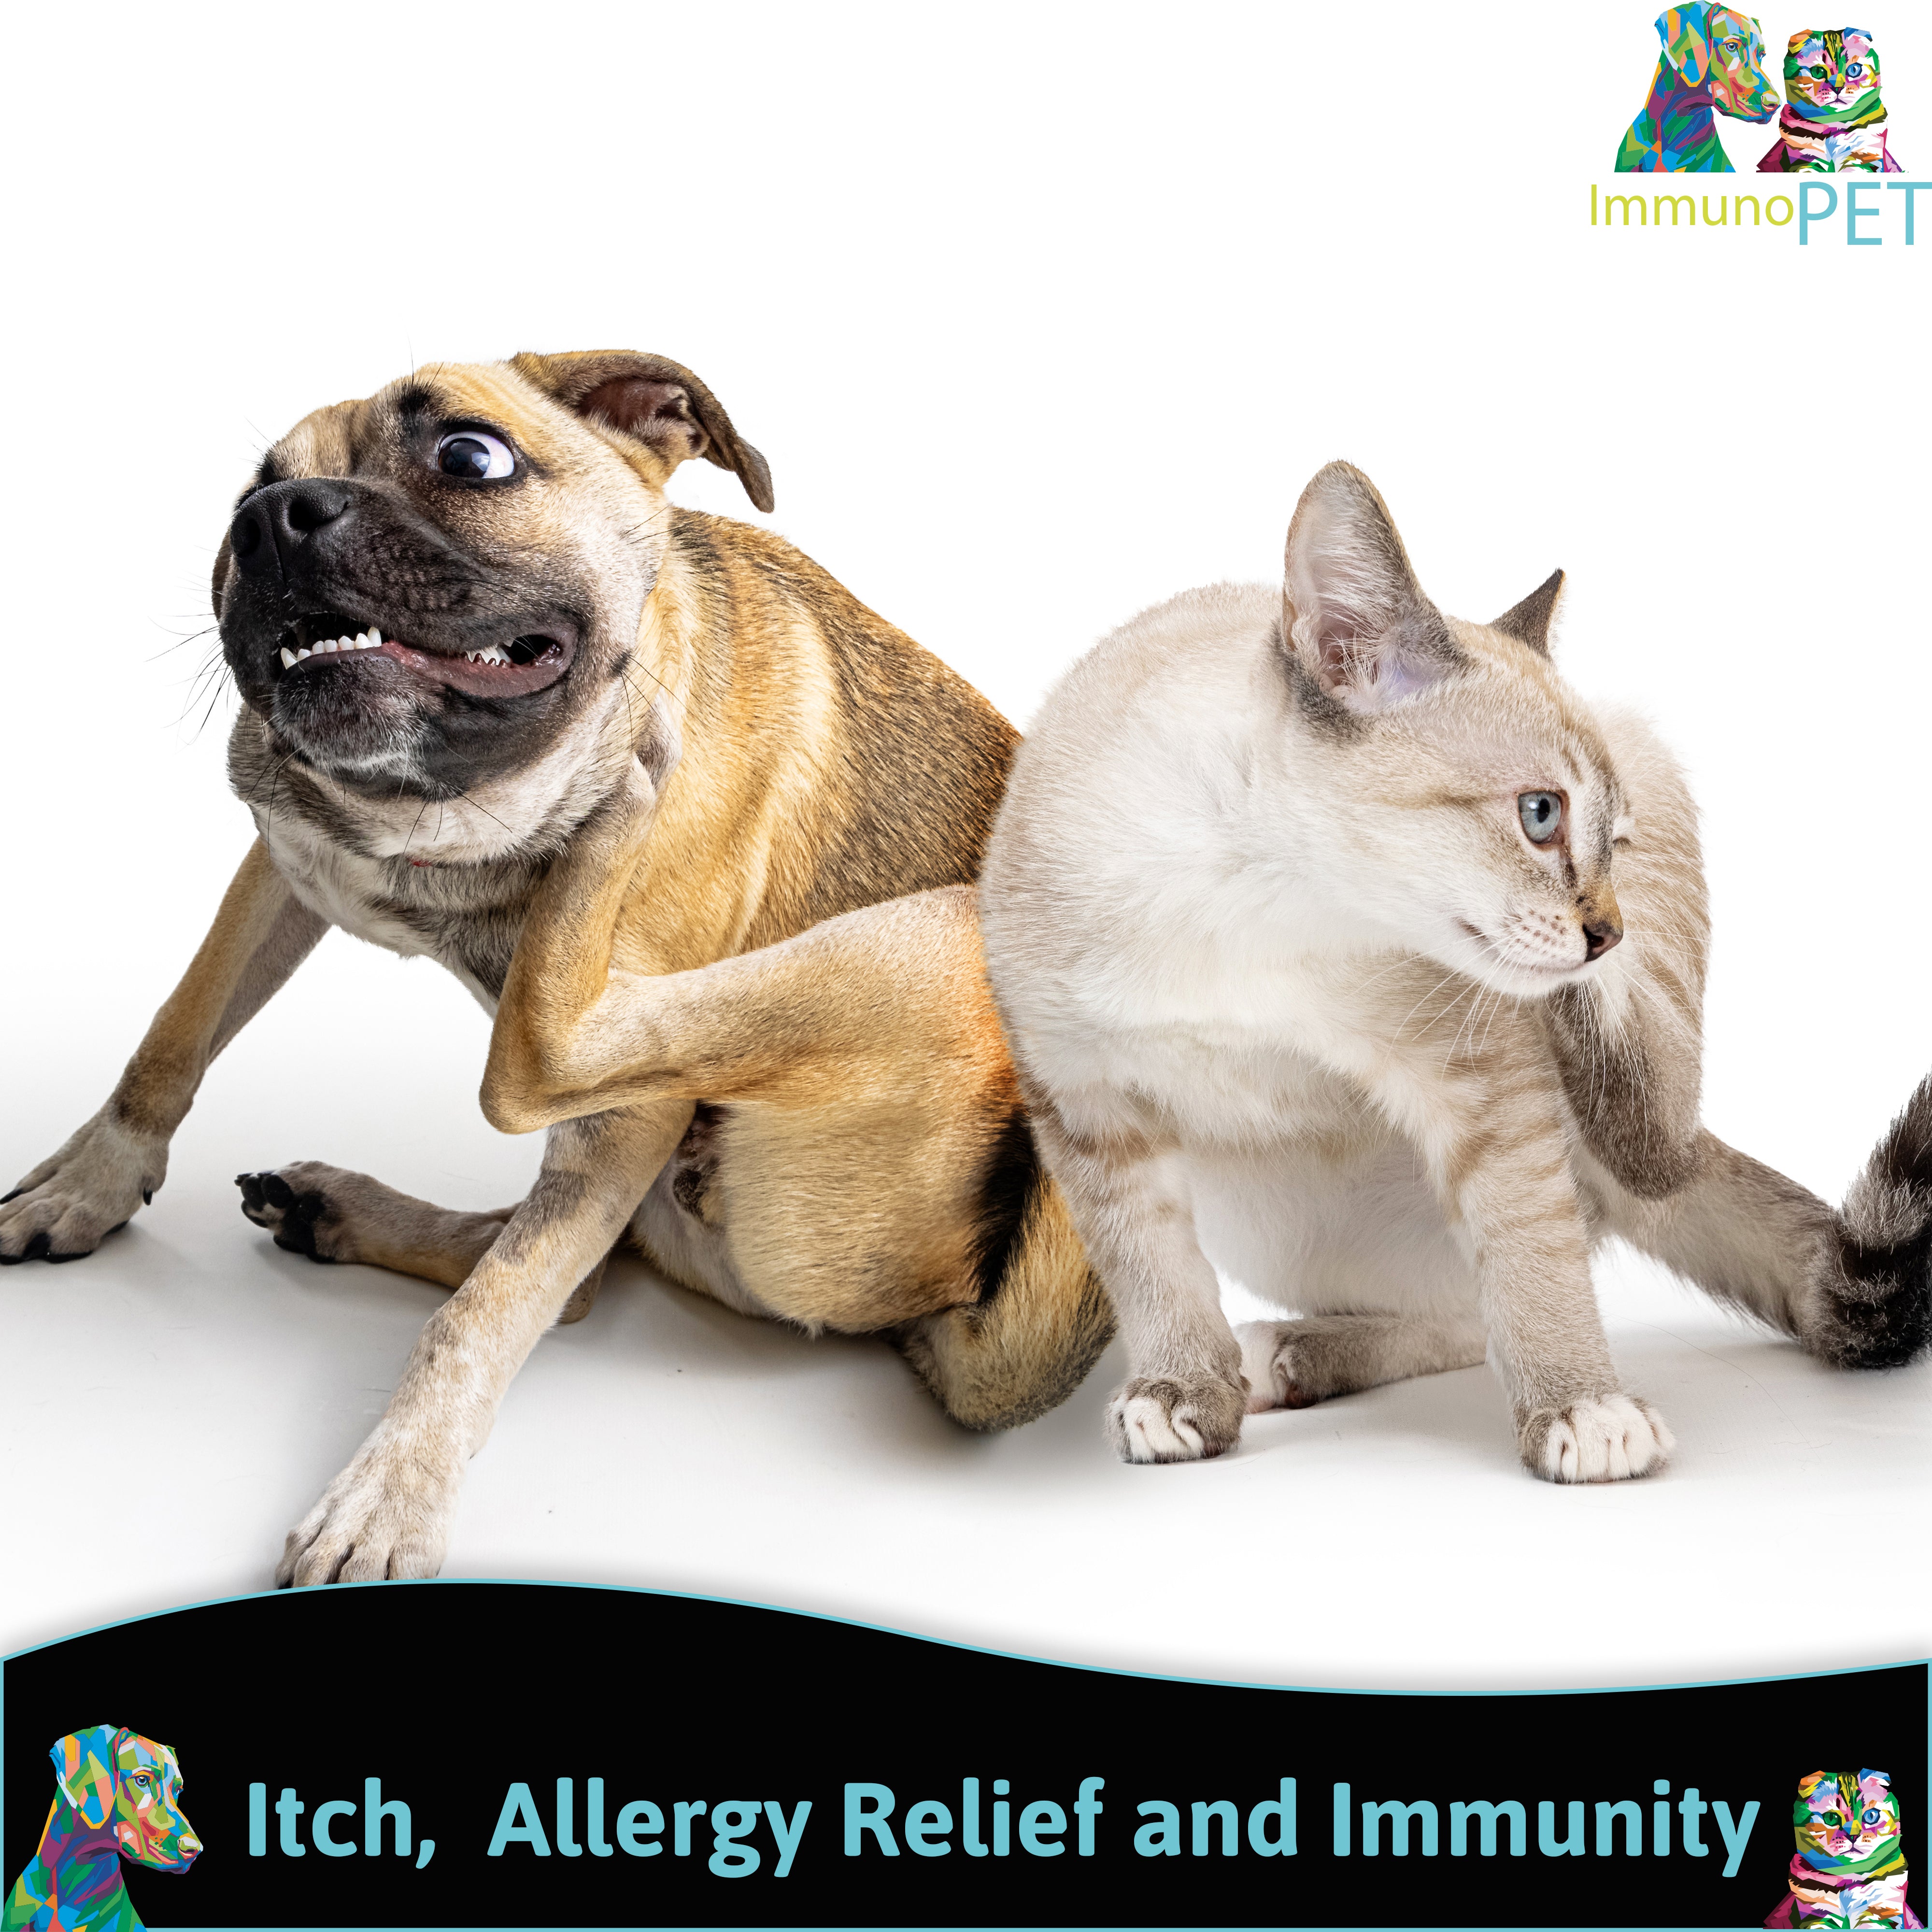 Dog and Cat Scratching and Itching themselves. Pet immunity, pet vitamins, hot spots and itchiness and scratching relief.